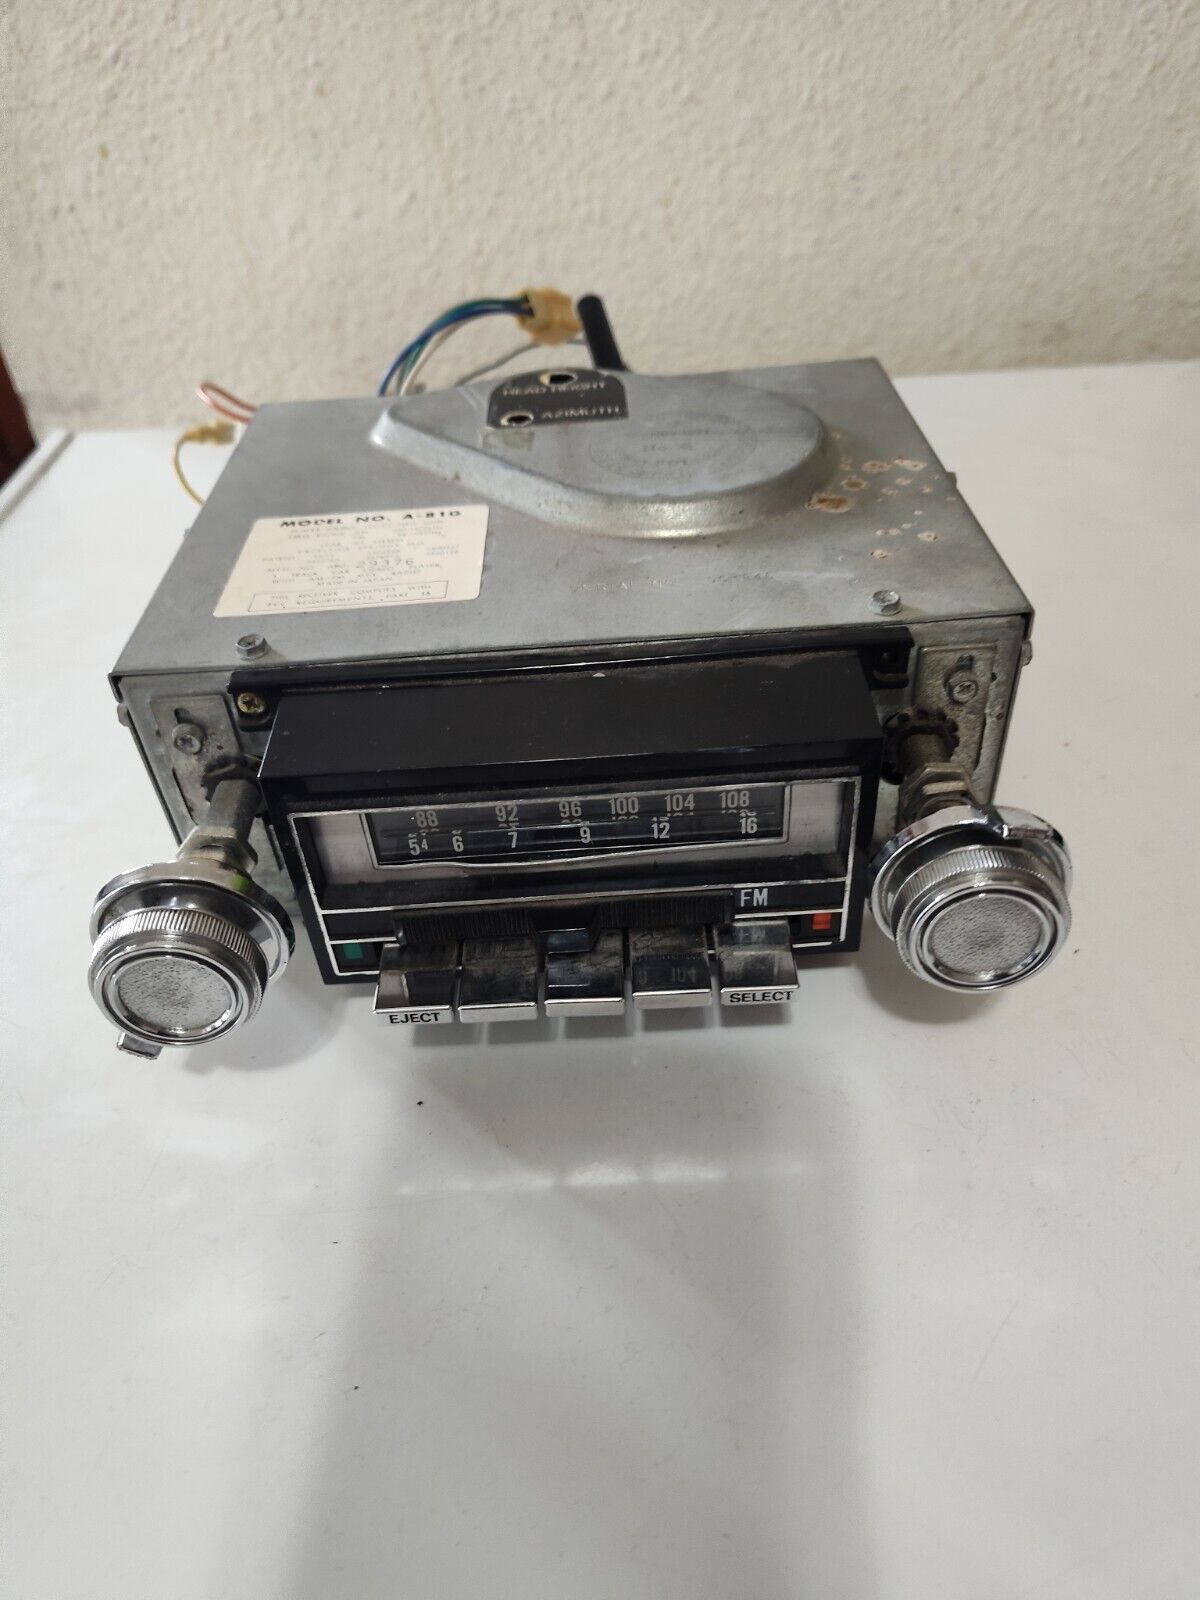 Vintage Car Radio Delco GM Electronics (Untested And Unsure Or Age)